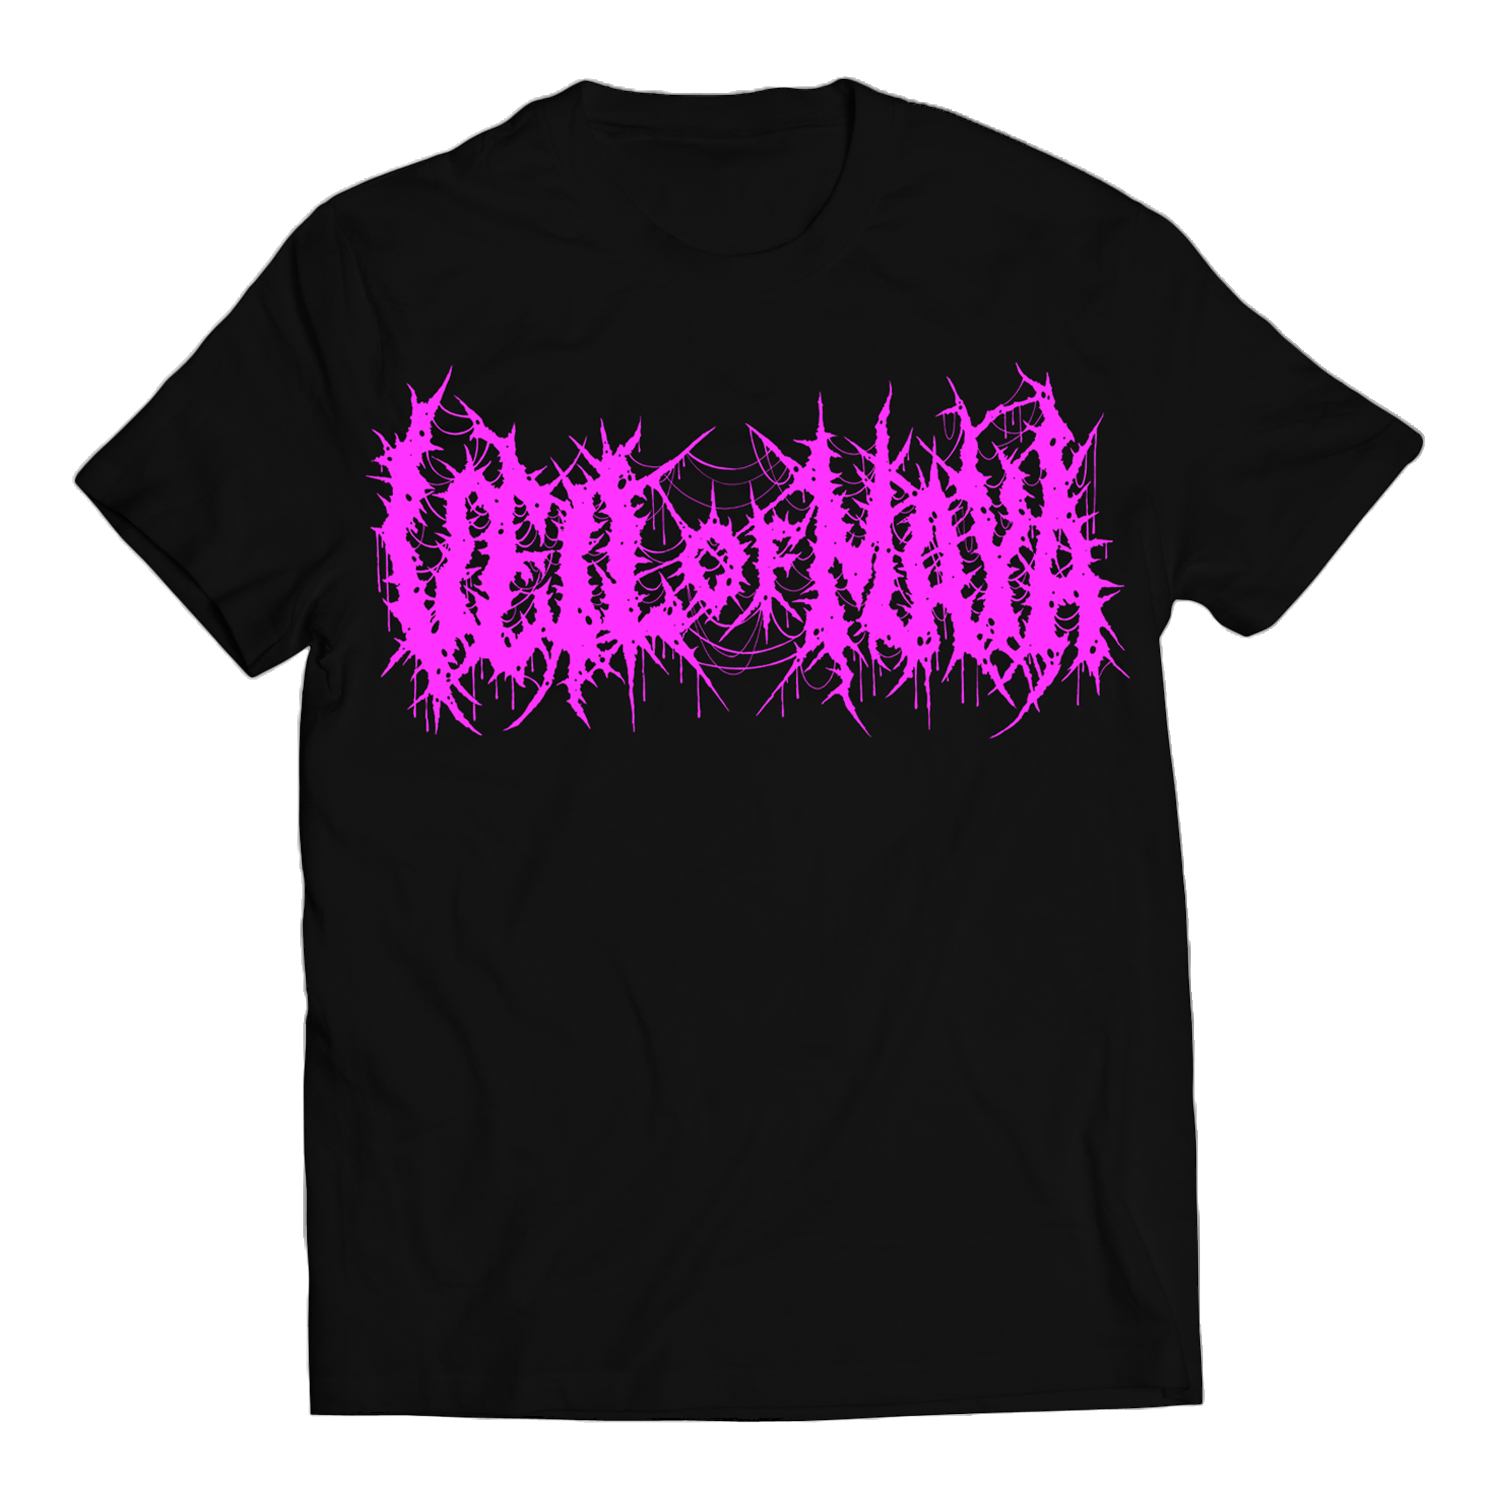 image of a black tee shirt on a transparent background. front of tee has a death metal font print in pink that says veil of maya